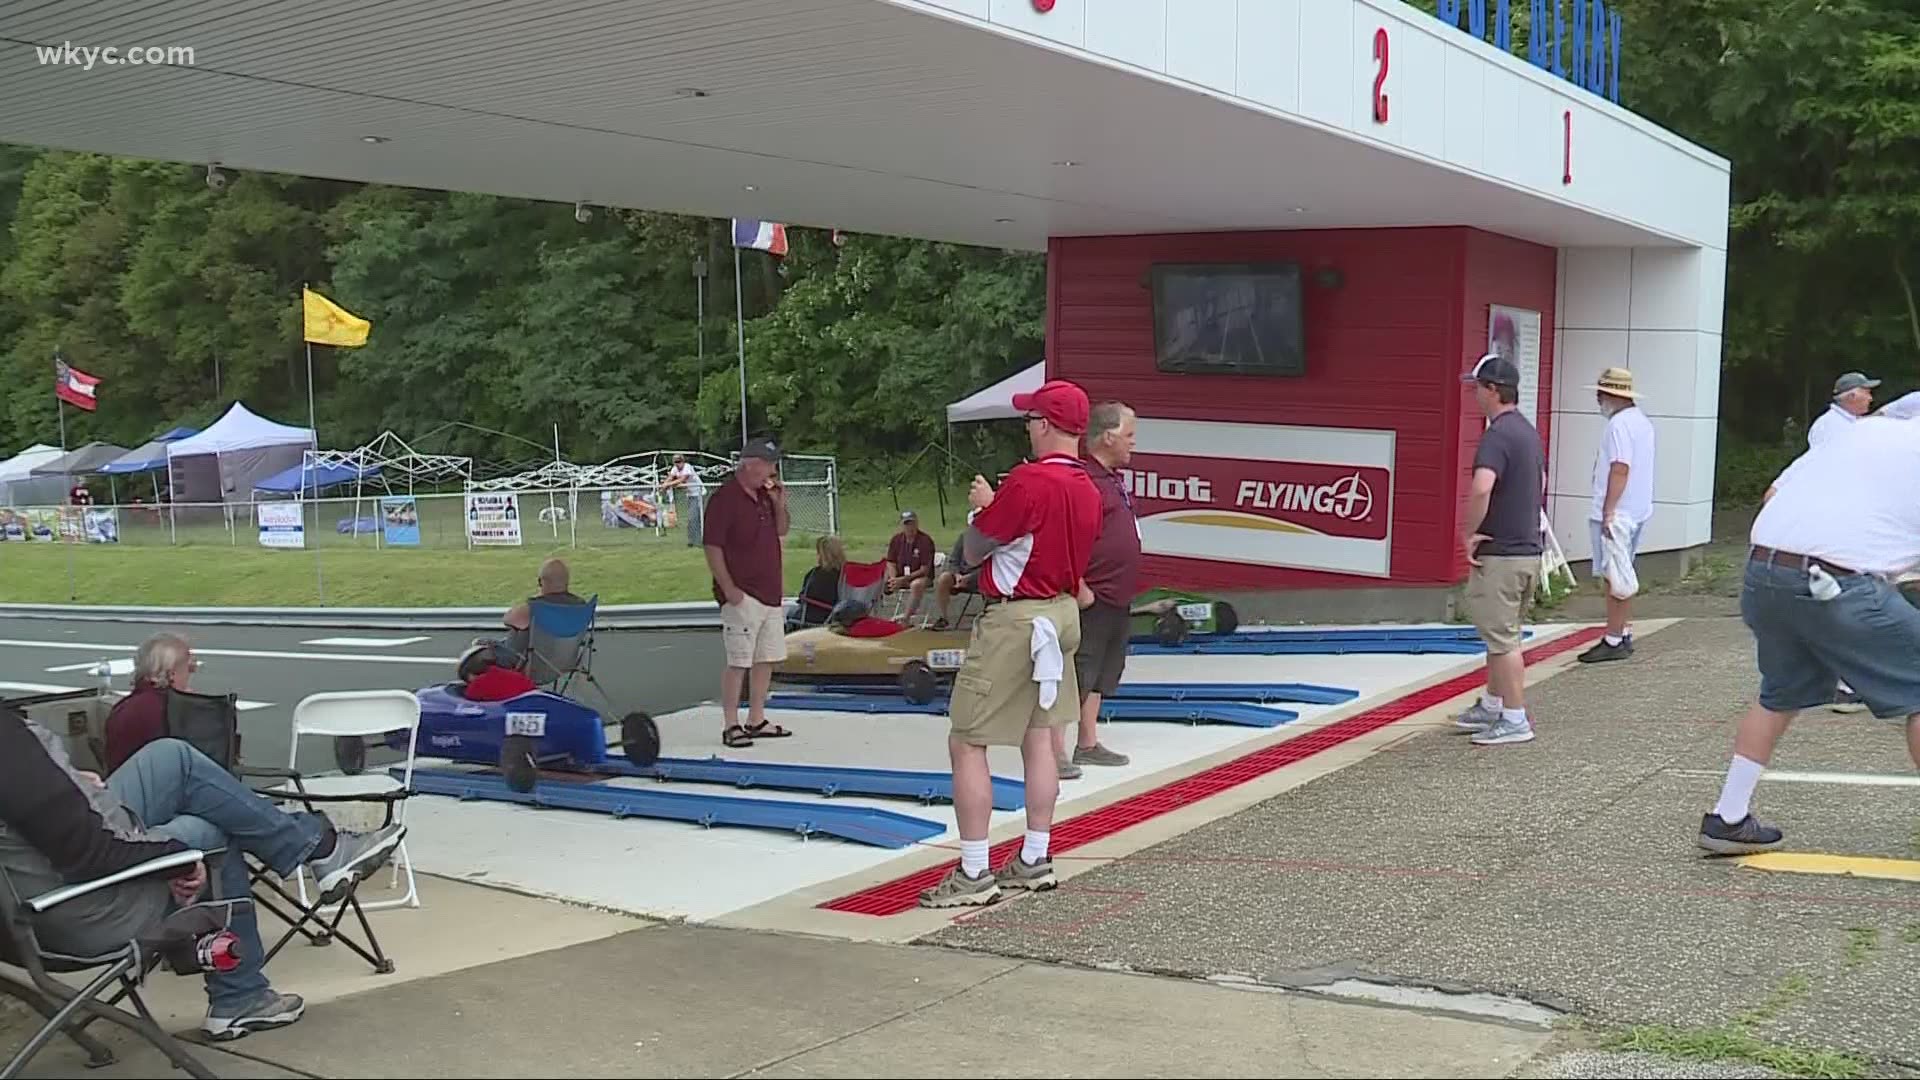 After a year off, the 83rd annual First Energy All American Soap Box Derby took place today.